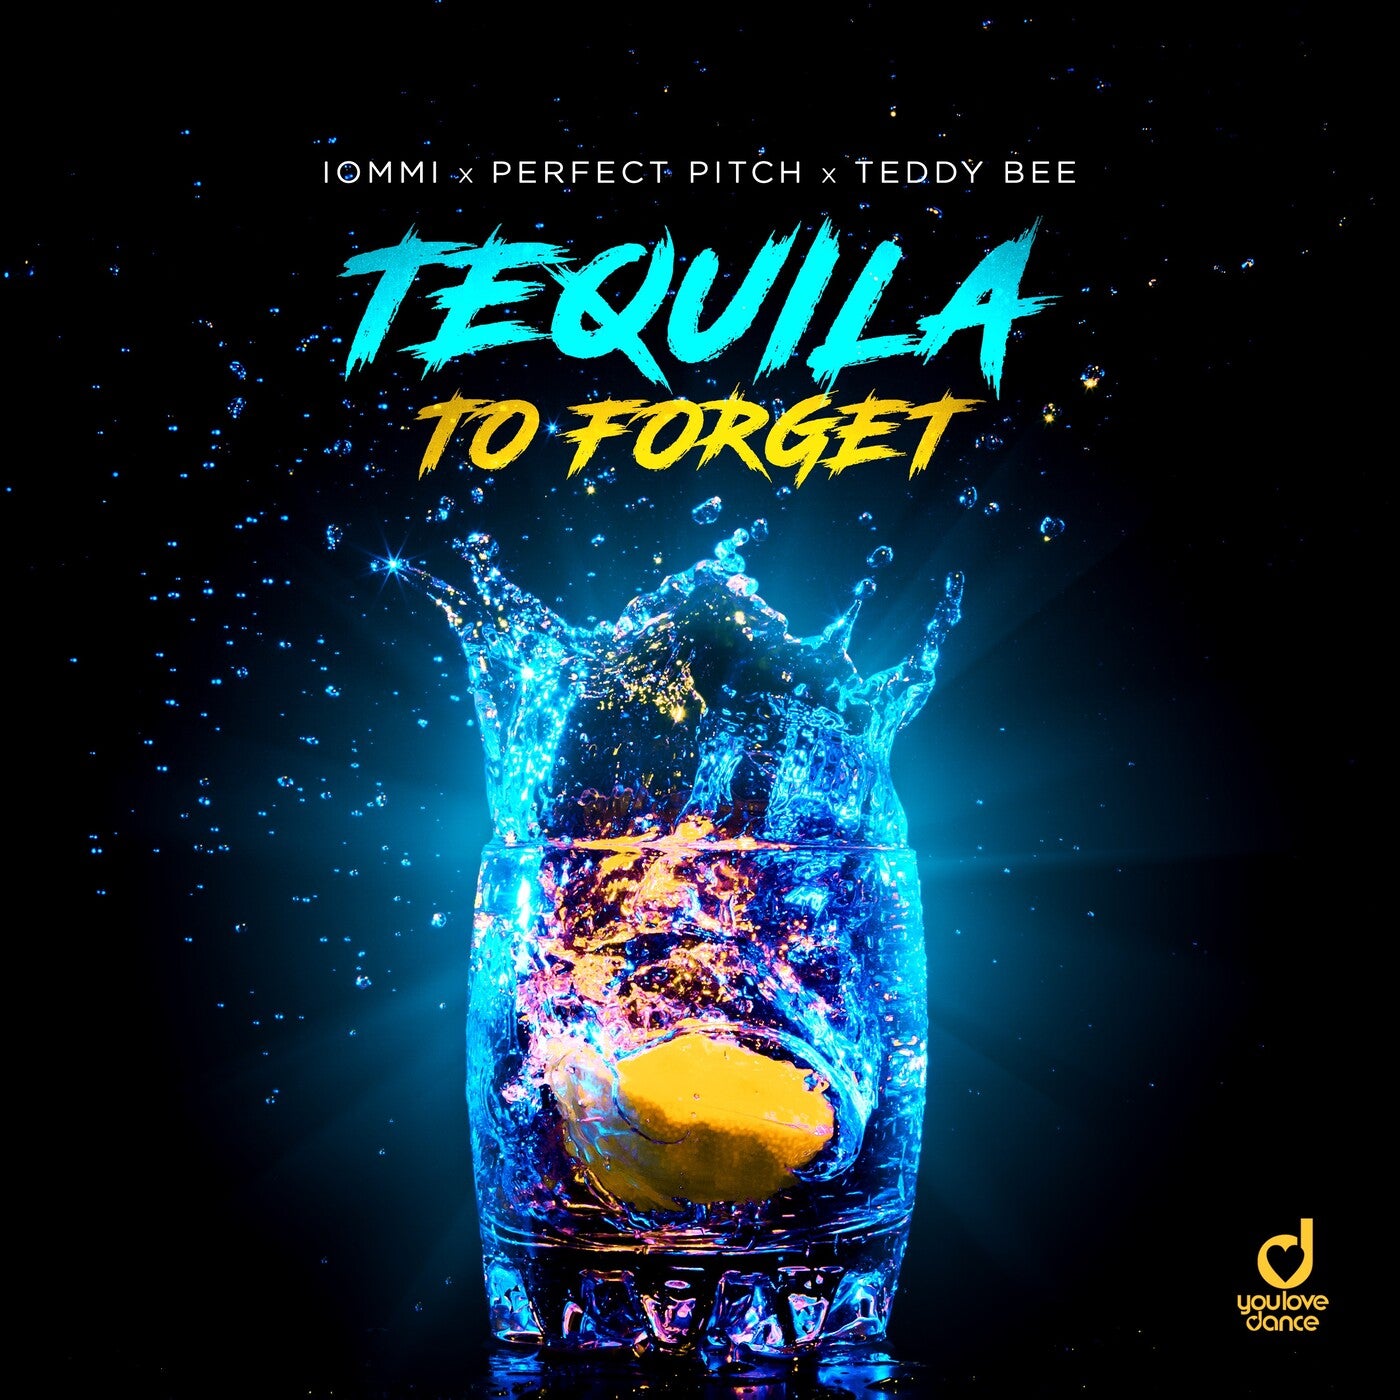 Tequila to Forget